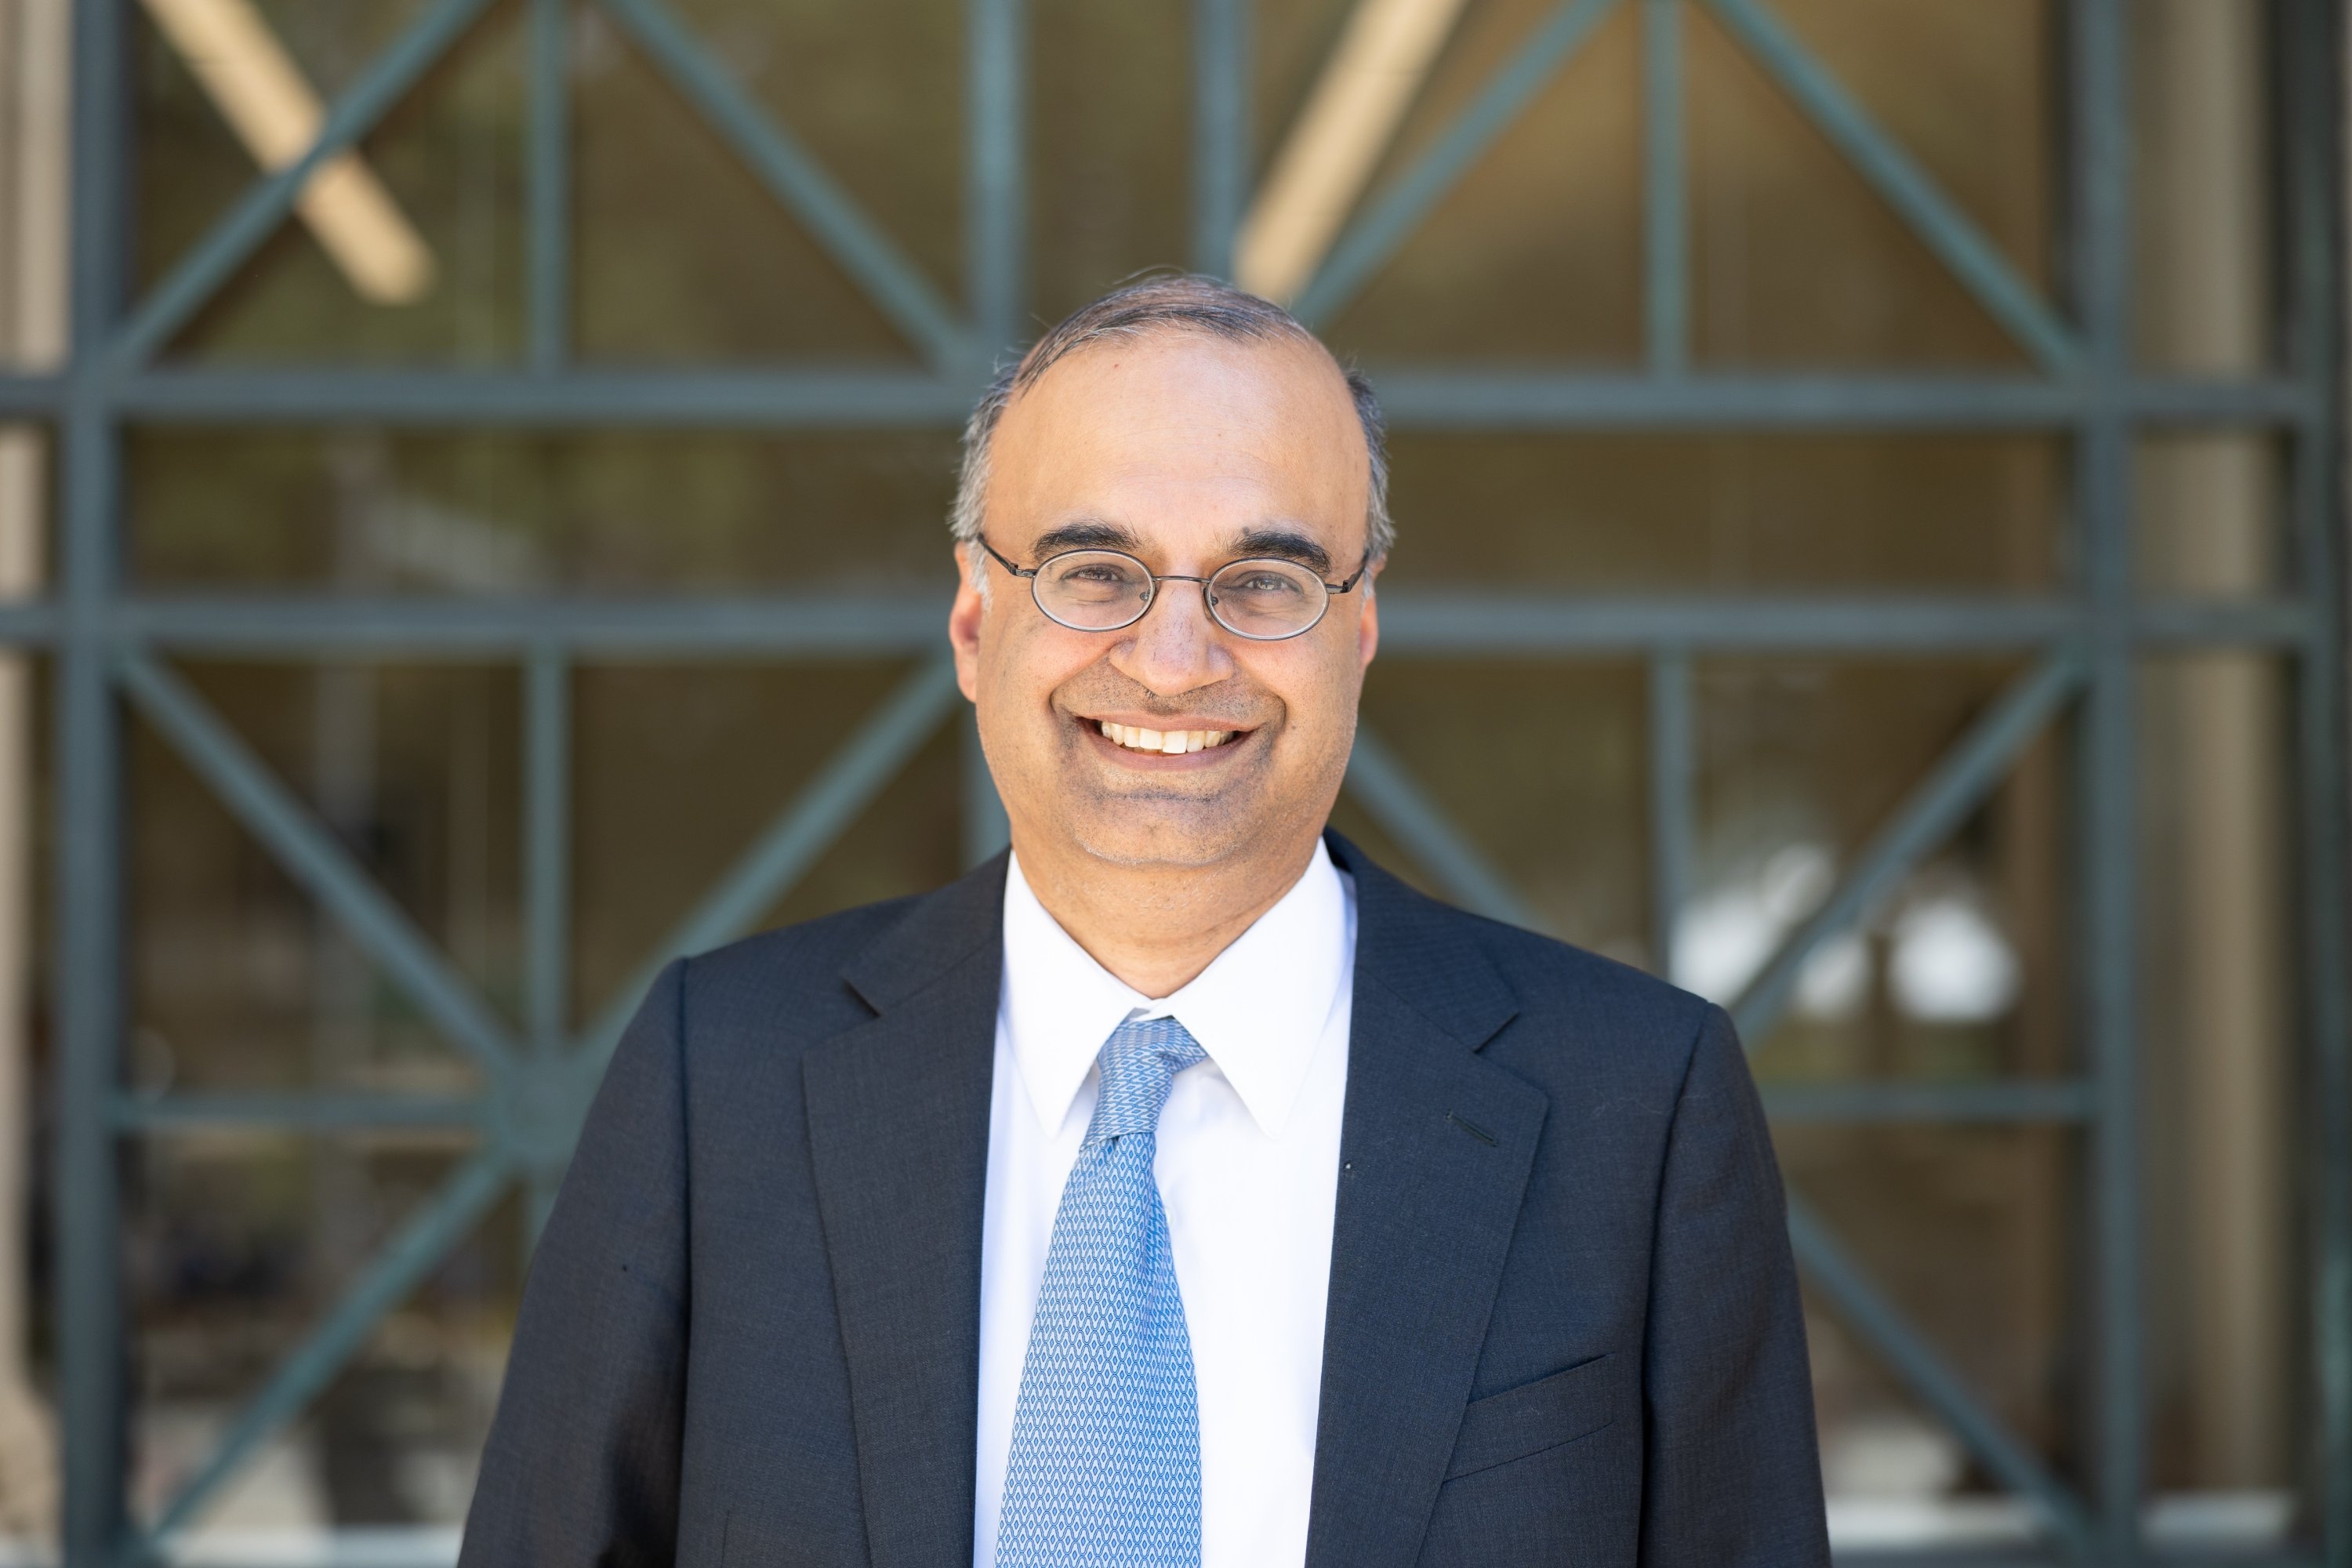 “I am deeply honored that I can continue the important work of the department. Peter Fisher’s departmental leadership has been an inspiration” says Deepto Chakrabarty, who has been associate department head since 2020 and co-leader of the physics course 8.01, a required subject for all MIT undergraduates, for the past eight years.